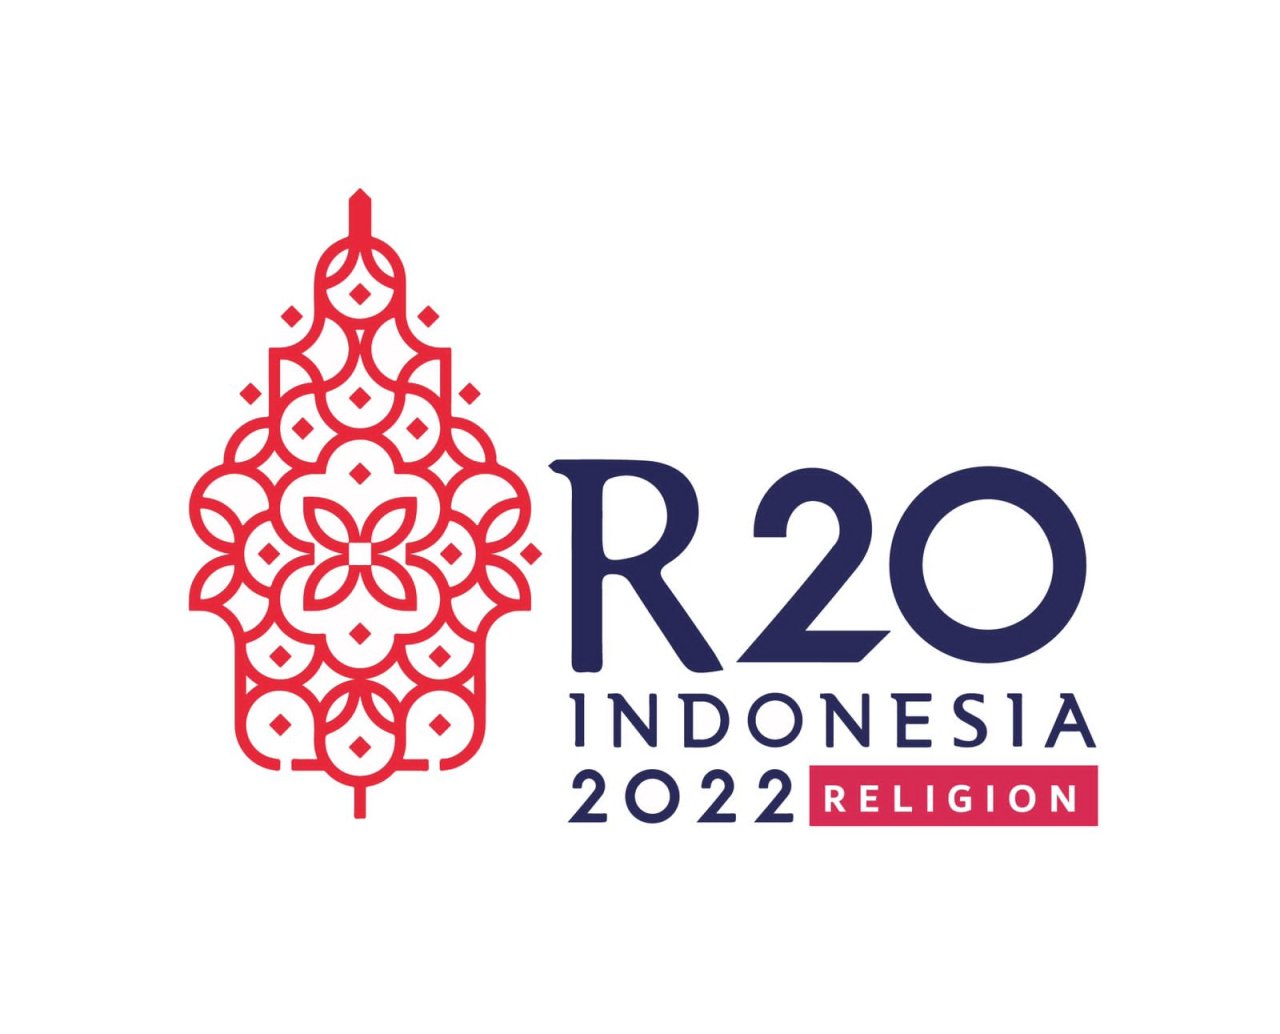 G20 Interfaith Summit Presidency announces launch of "Building Bridges between East and West Forum"